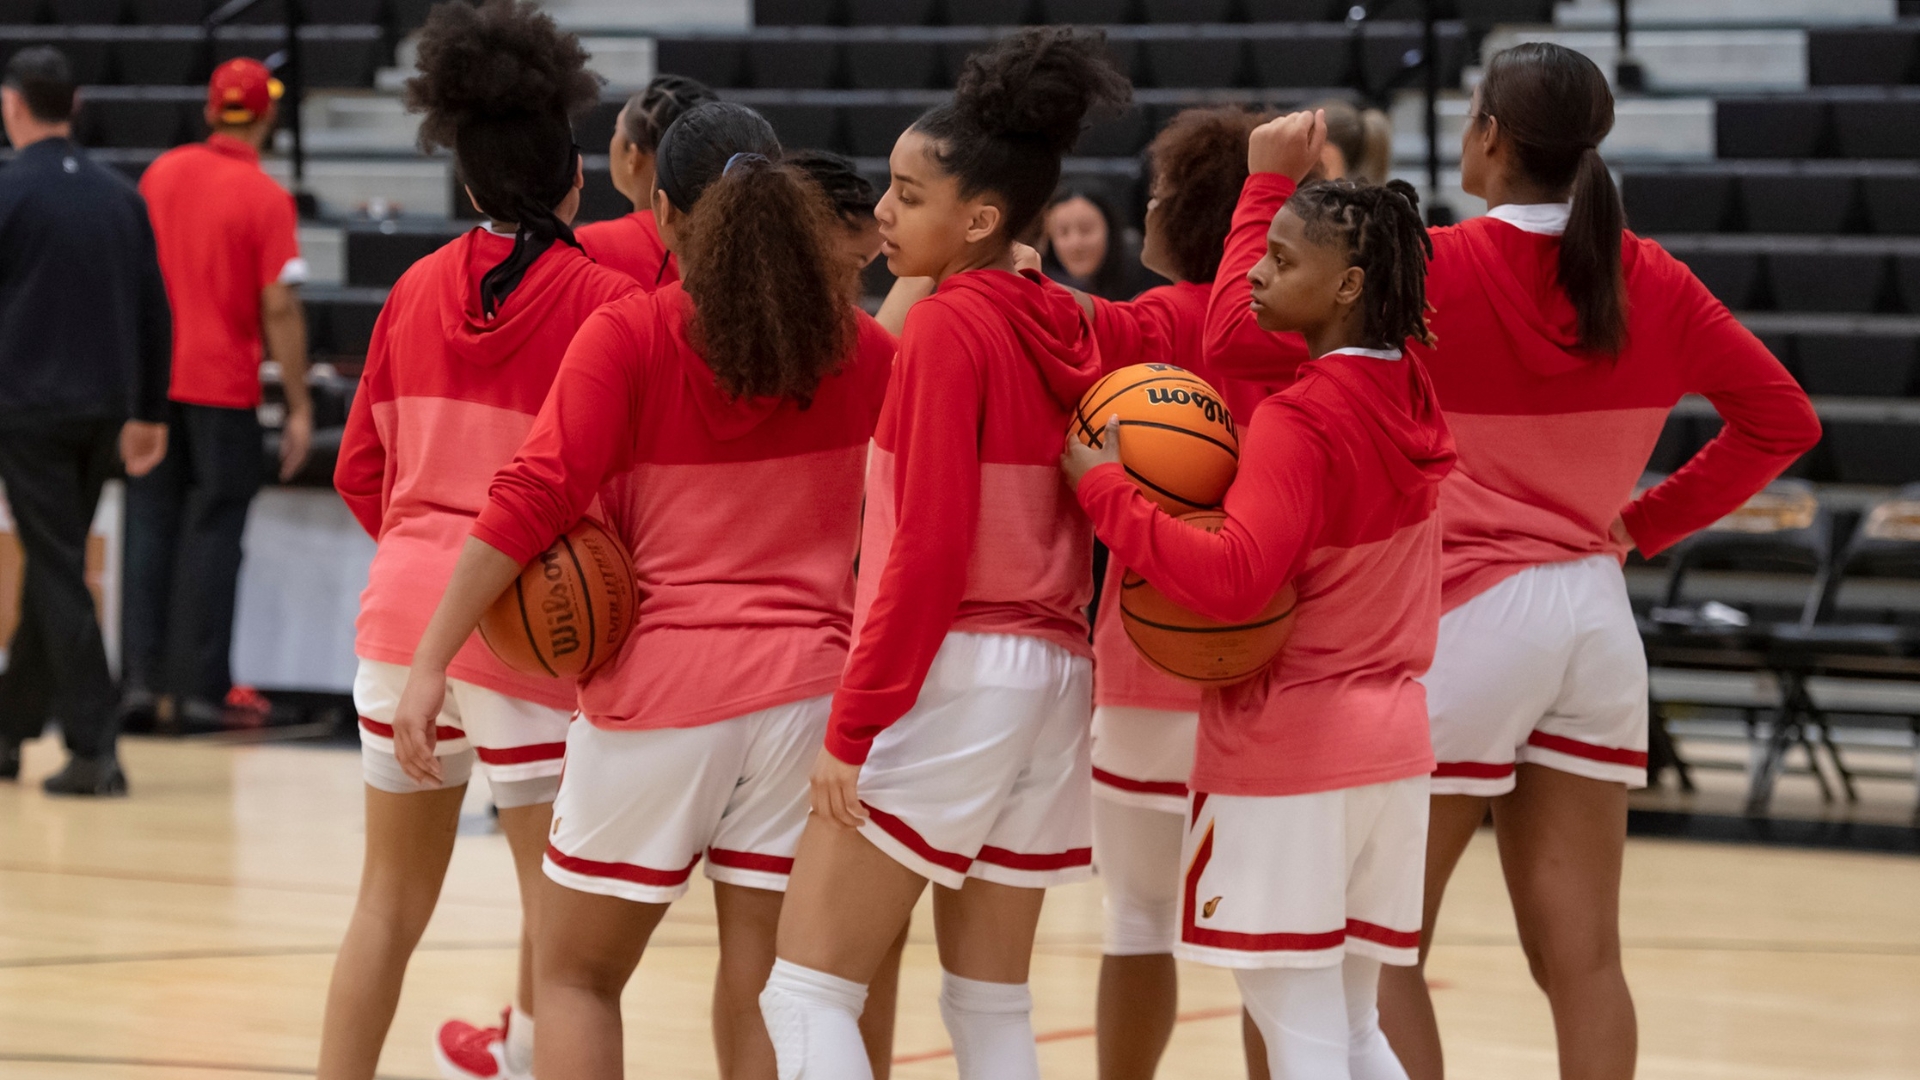 UDC had their first winning season since the 2015-16 season, finishing with a 15-13 overall record.